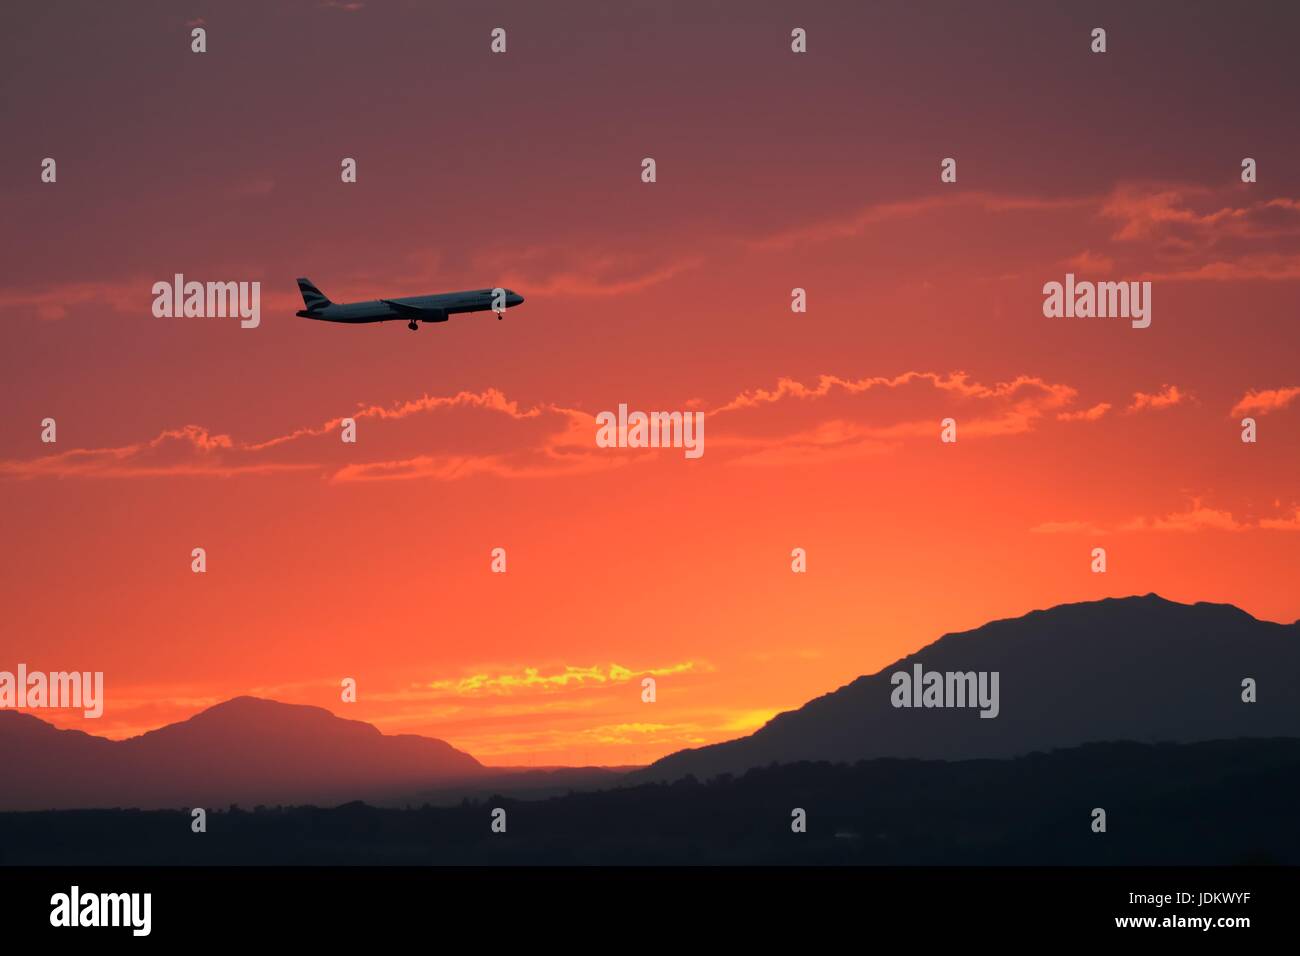 Paisley, Scotland, UK. 20th, June, 2017. The setting sun glowed orange as a British Airways jet made its final approach to Glasgow international airport. Stock Photo